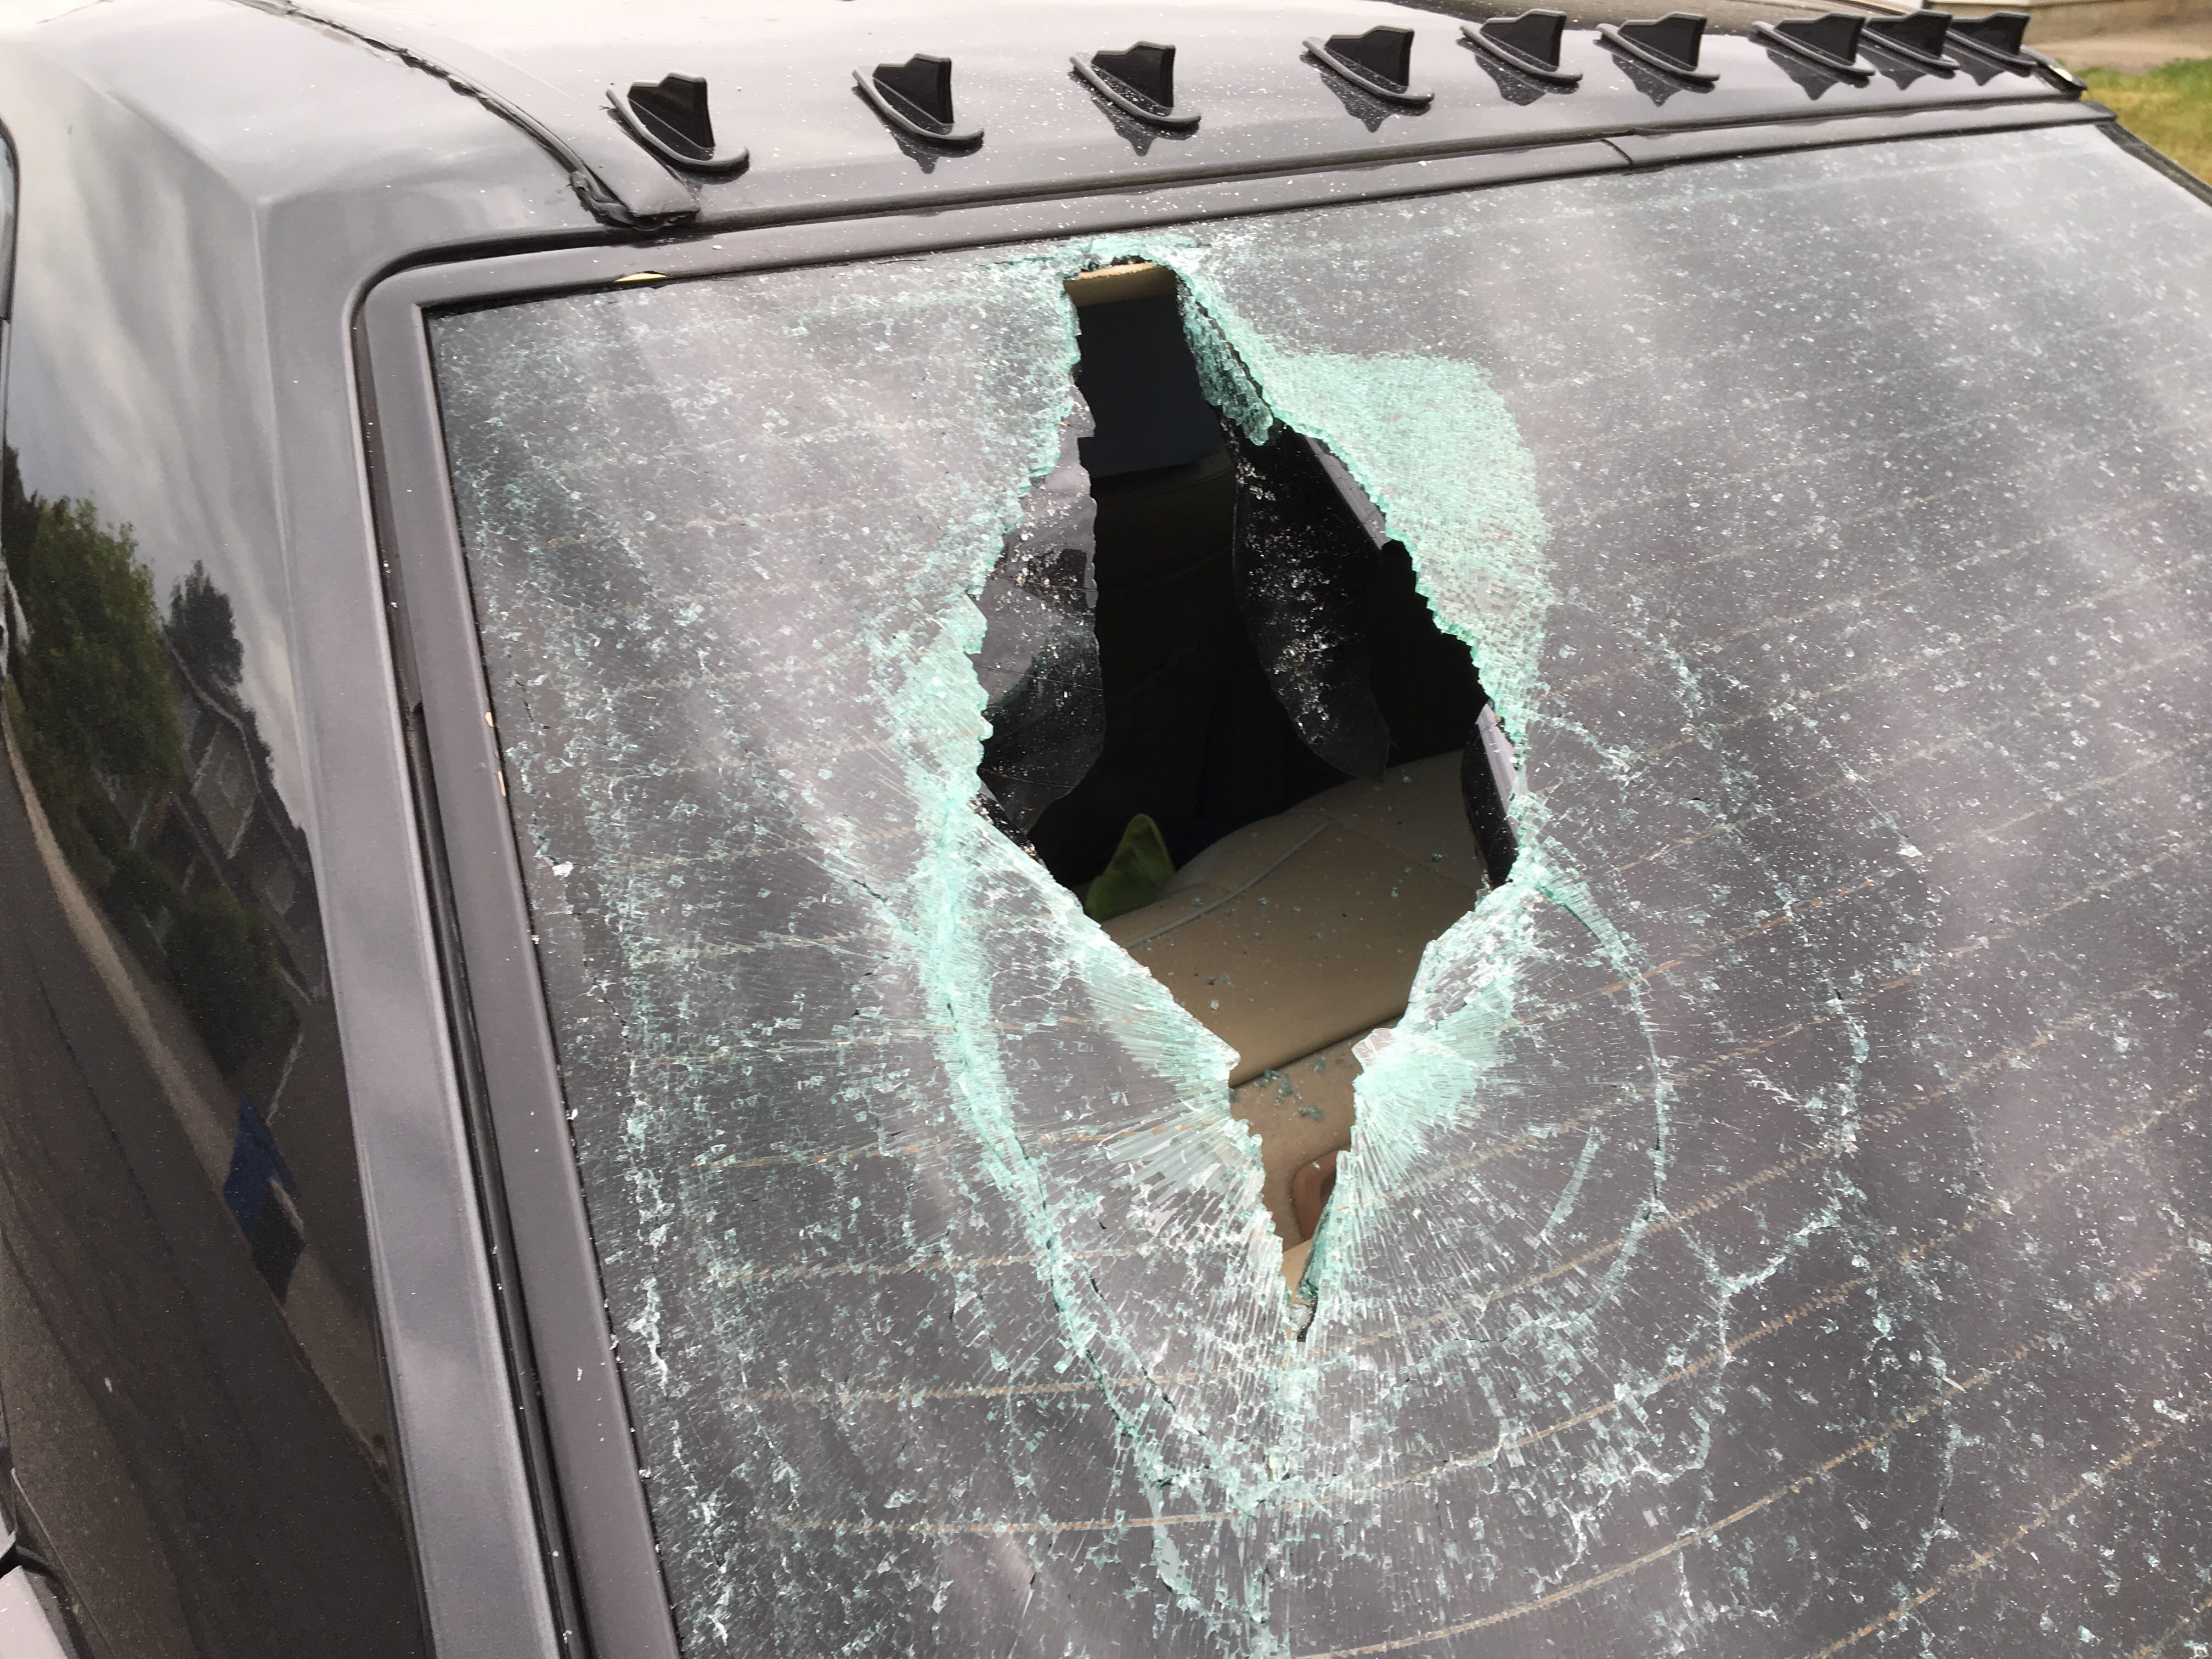 One of the vehicles damaged in aa spate of vandalism in Battle Ground.